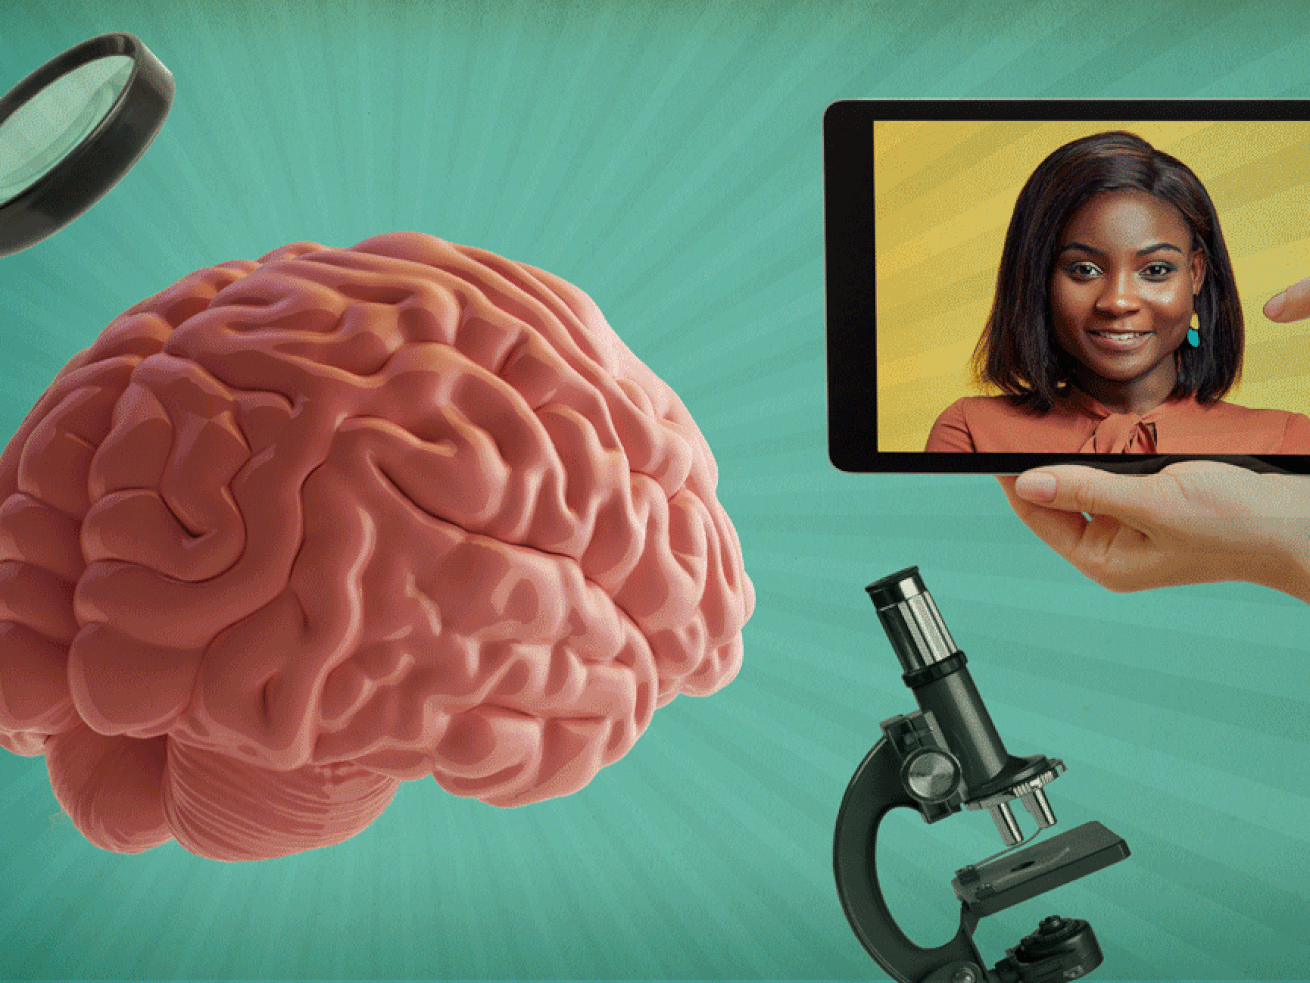 An animated gif shows a brain in the foreground. A magnifying lens hovers over it while a microscope sits underneath and to the side. Hands holding a tablet device appear to scroll through images of peoples’ faces. 